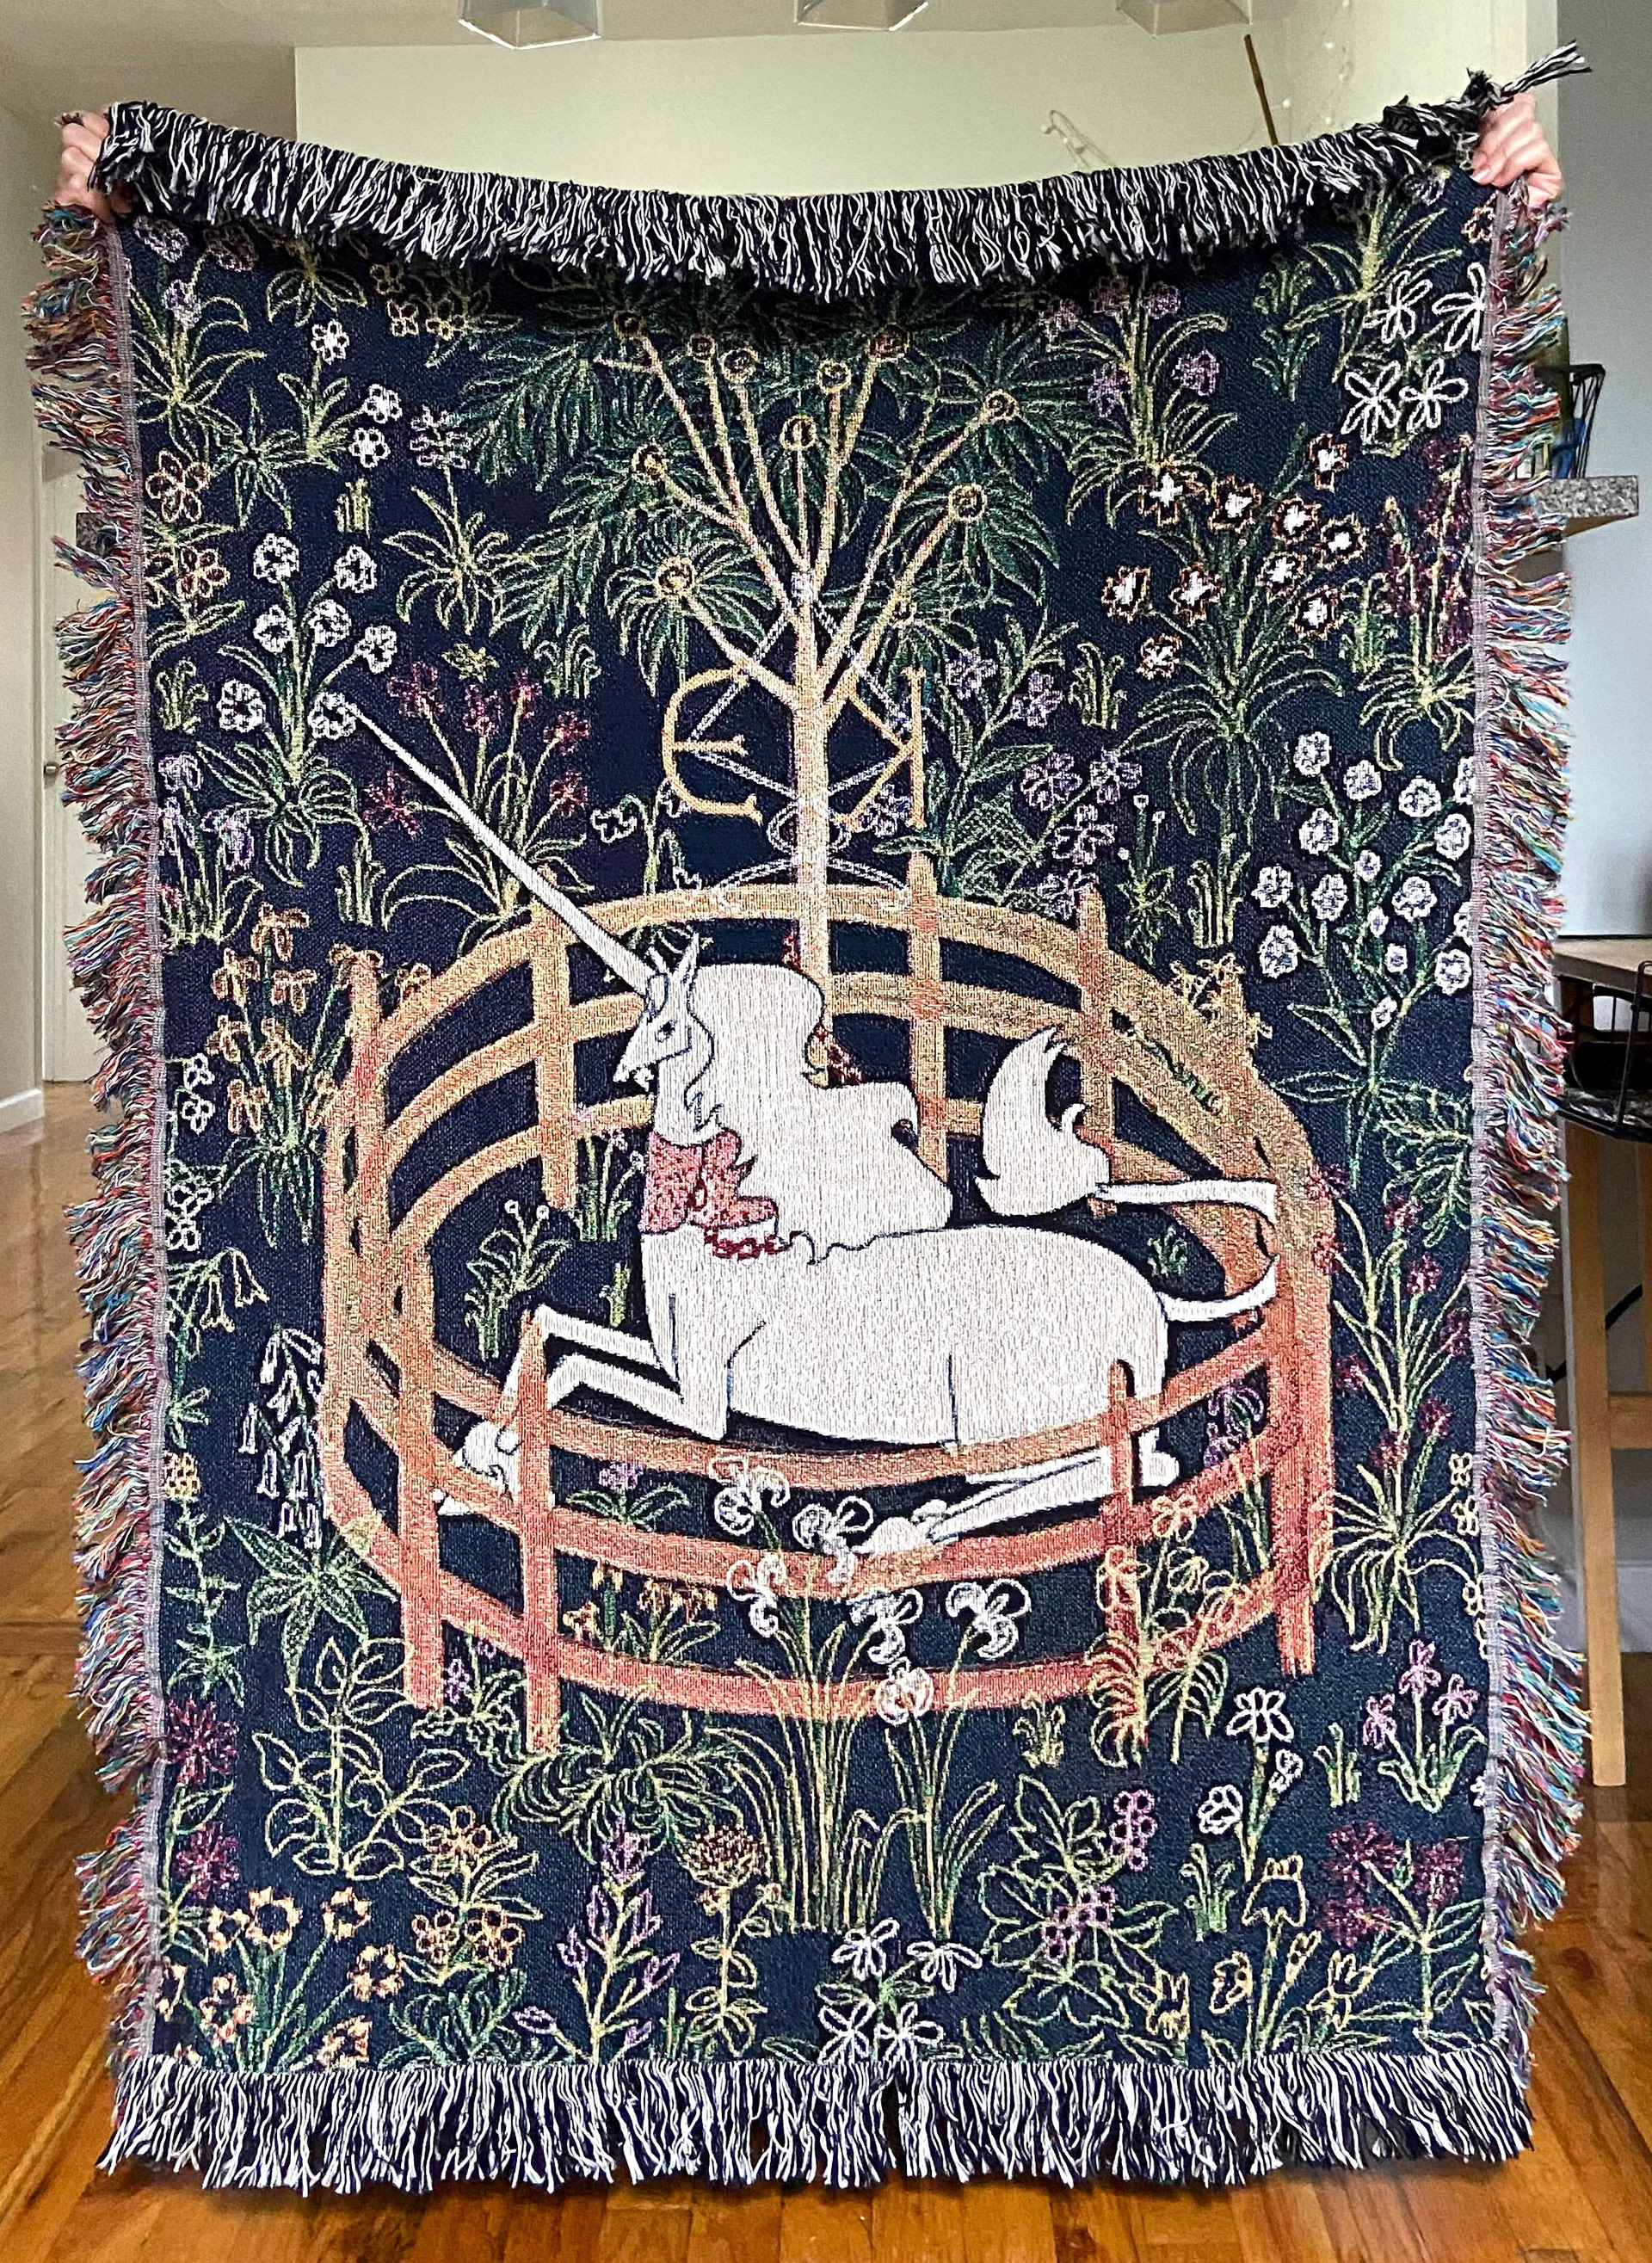 Woven wall tapestry by Edanur Kuntman depicting the Unicorn In Captivity Tapestry in her own style. This one is a smaller size of the previous one.